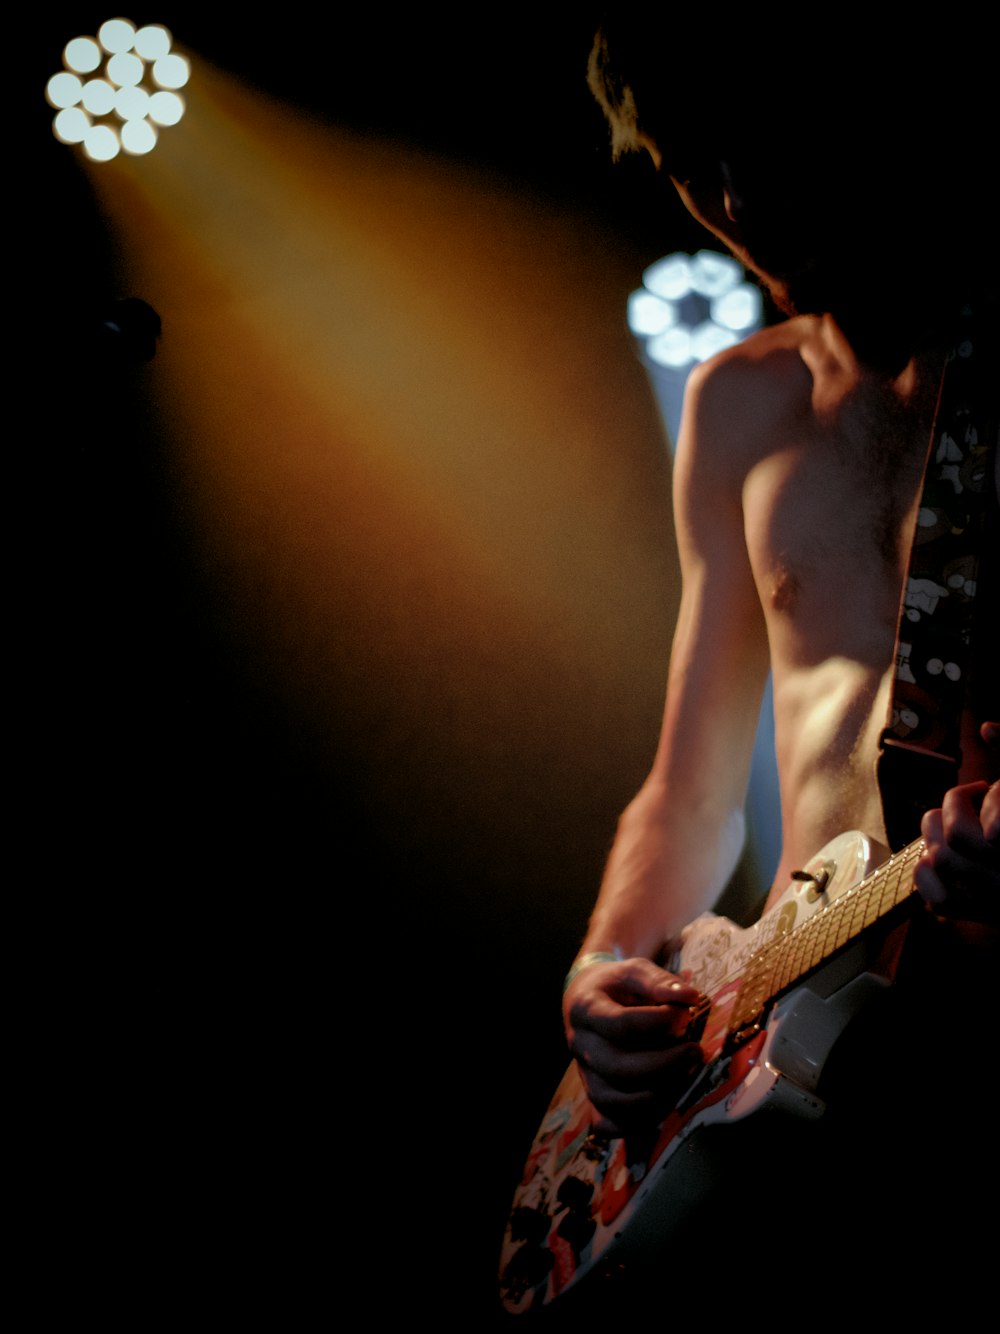 a shirtless man playing a guitar on stage